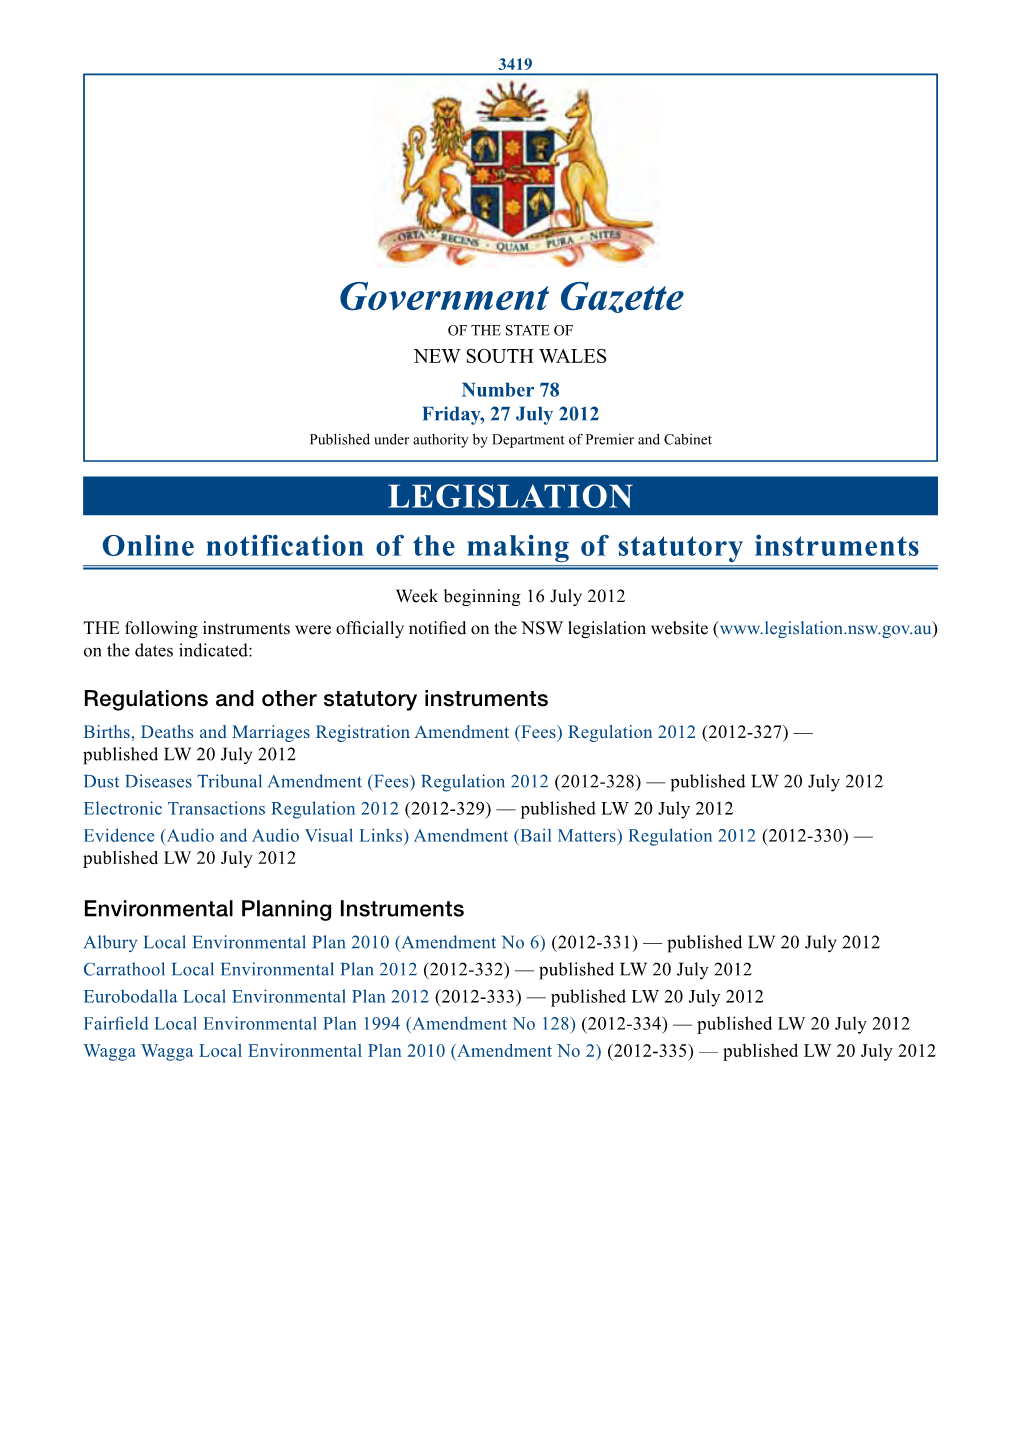 New South Wales Government Gazette No. 30 of 27 July 2012